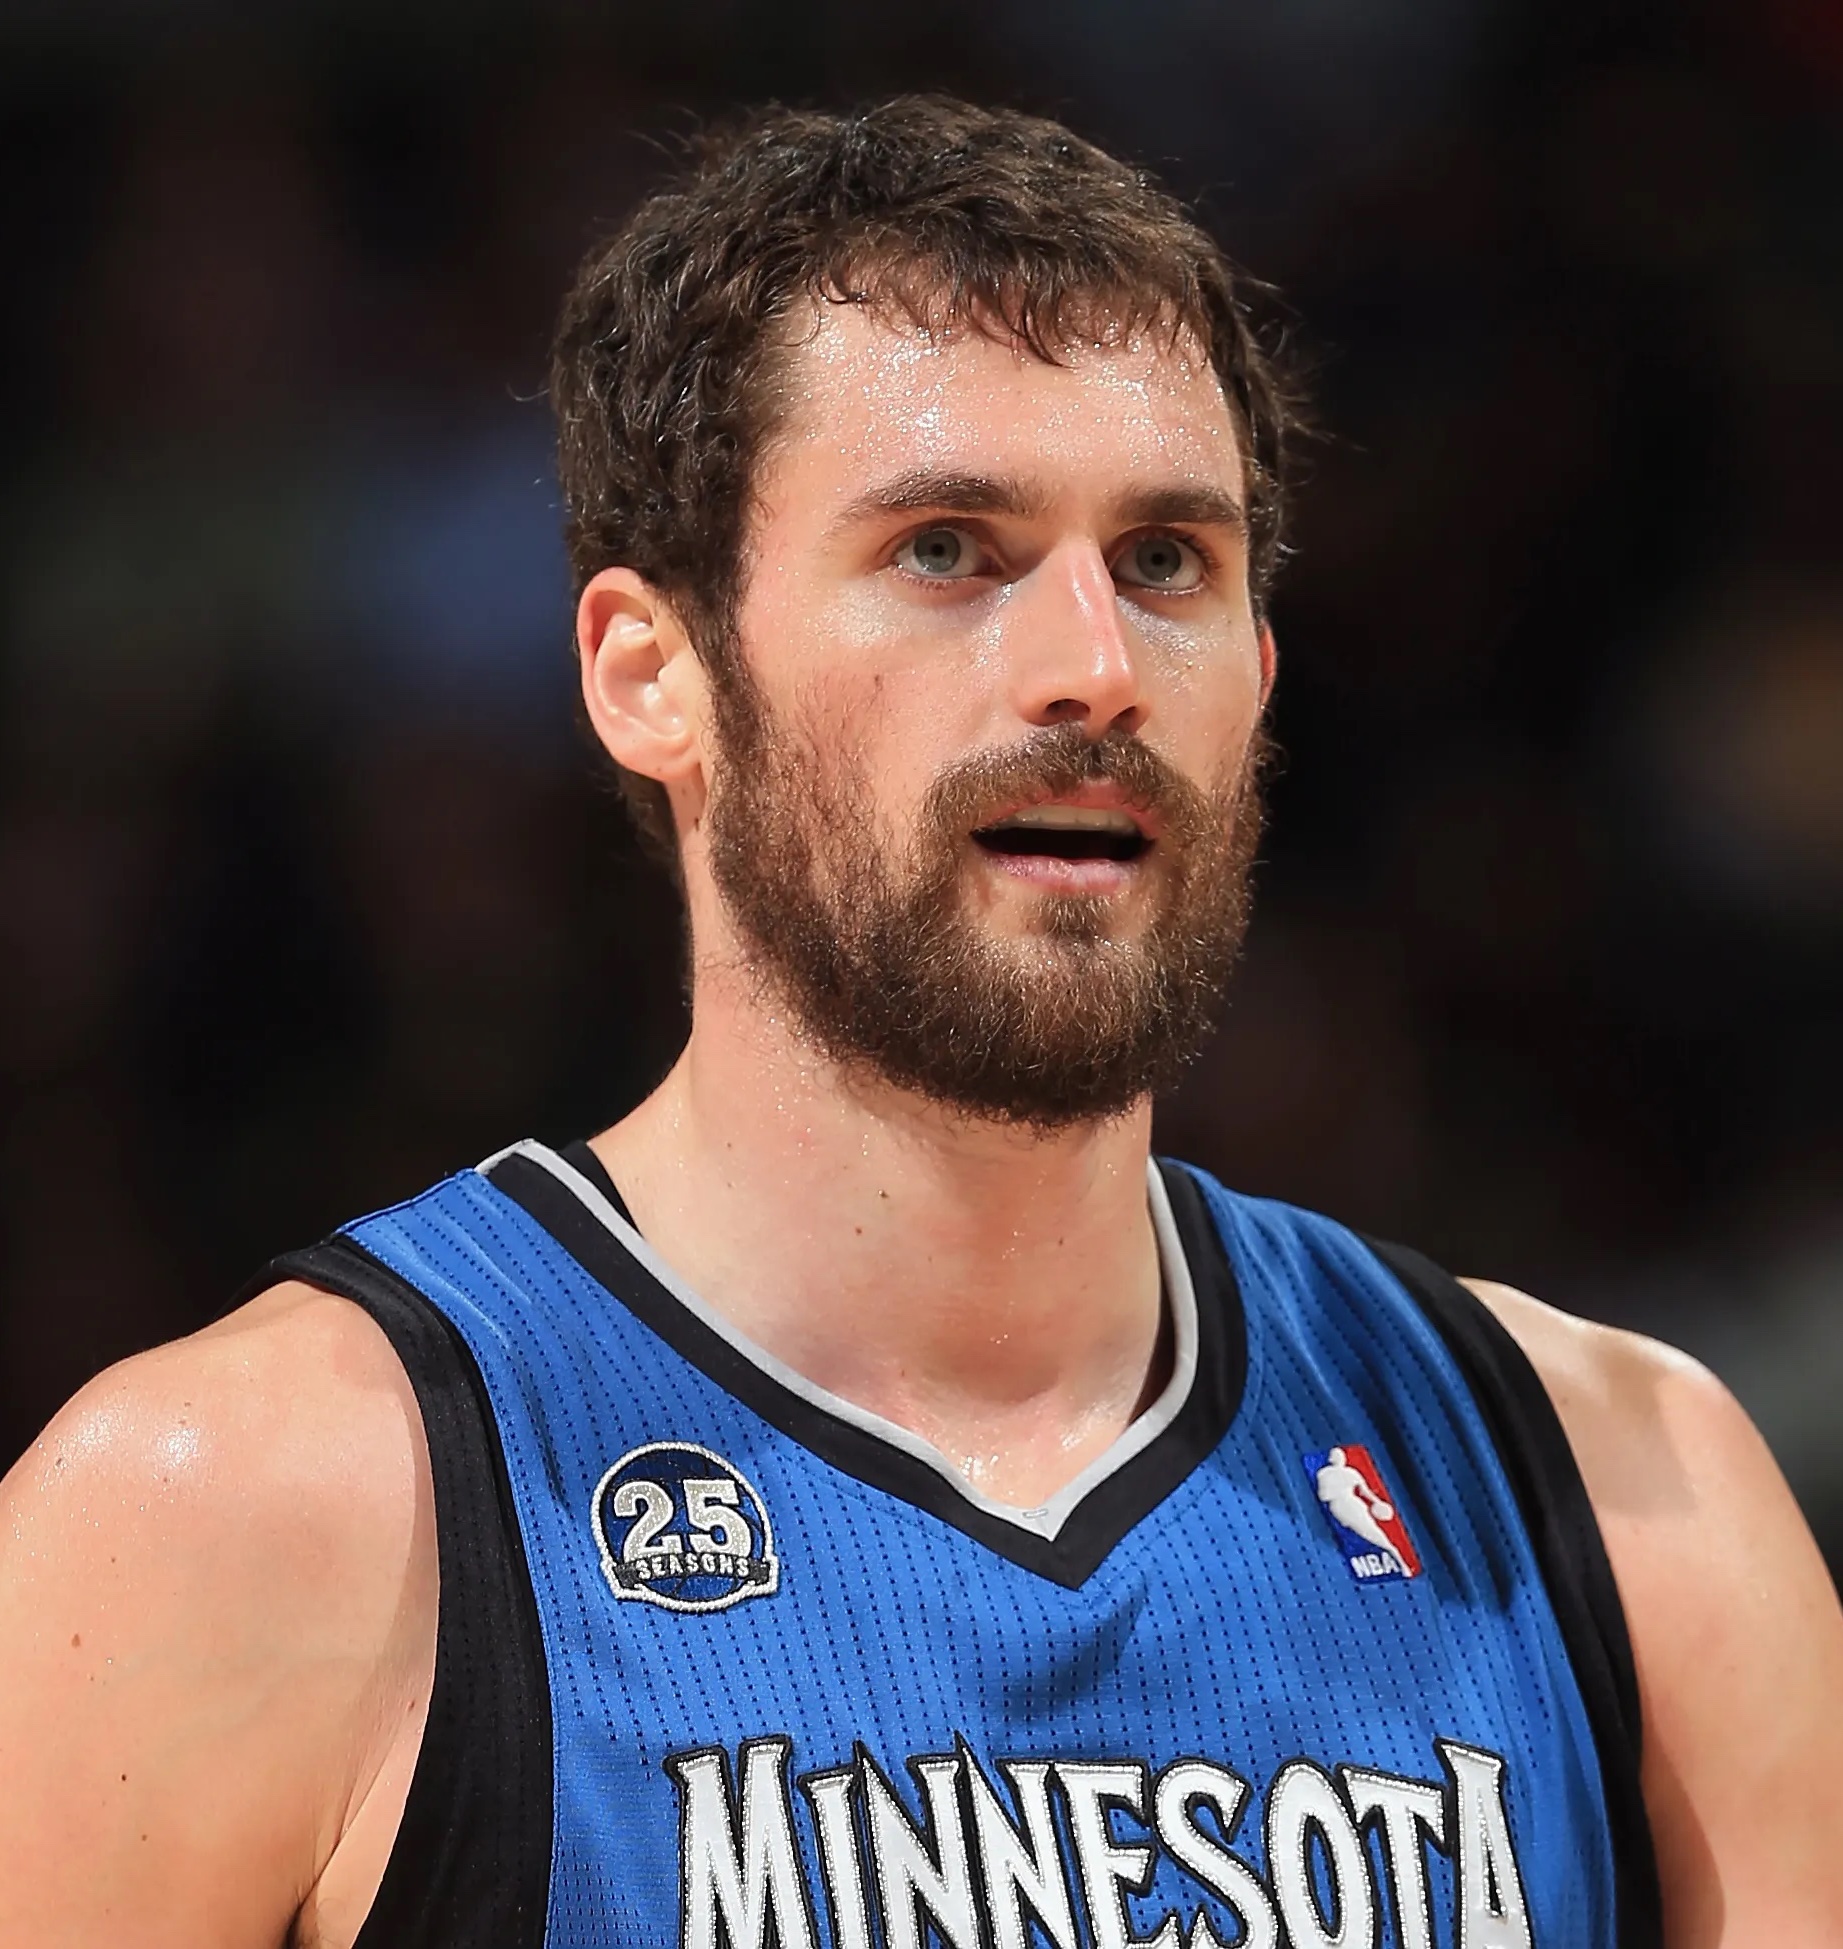 Celebs who slept with common people - kevin love young - 25 Sterbent Minnesota